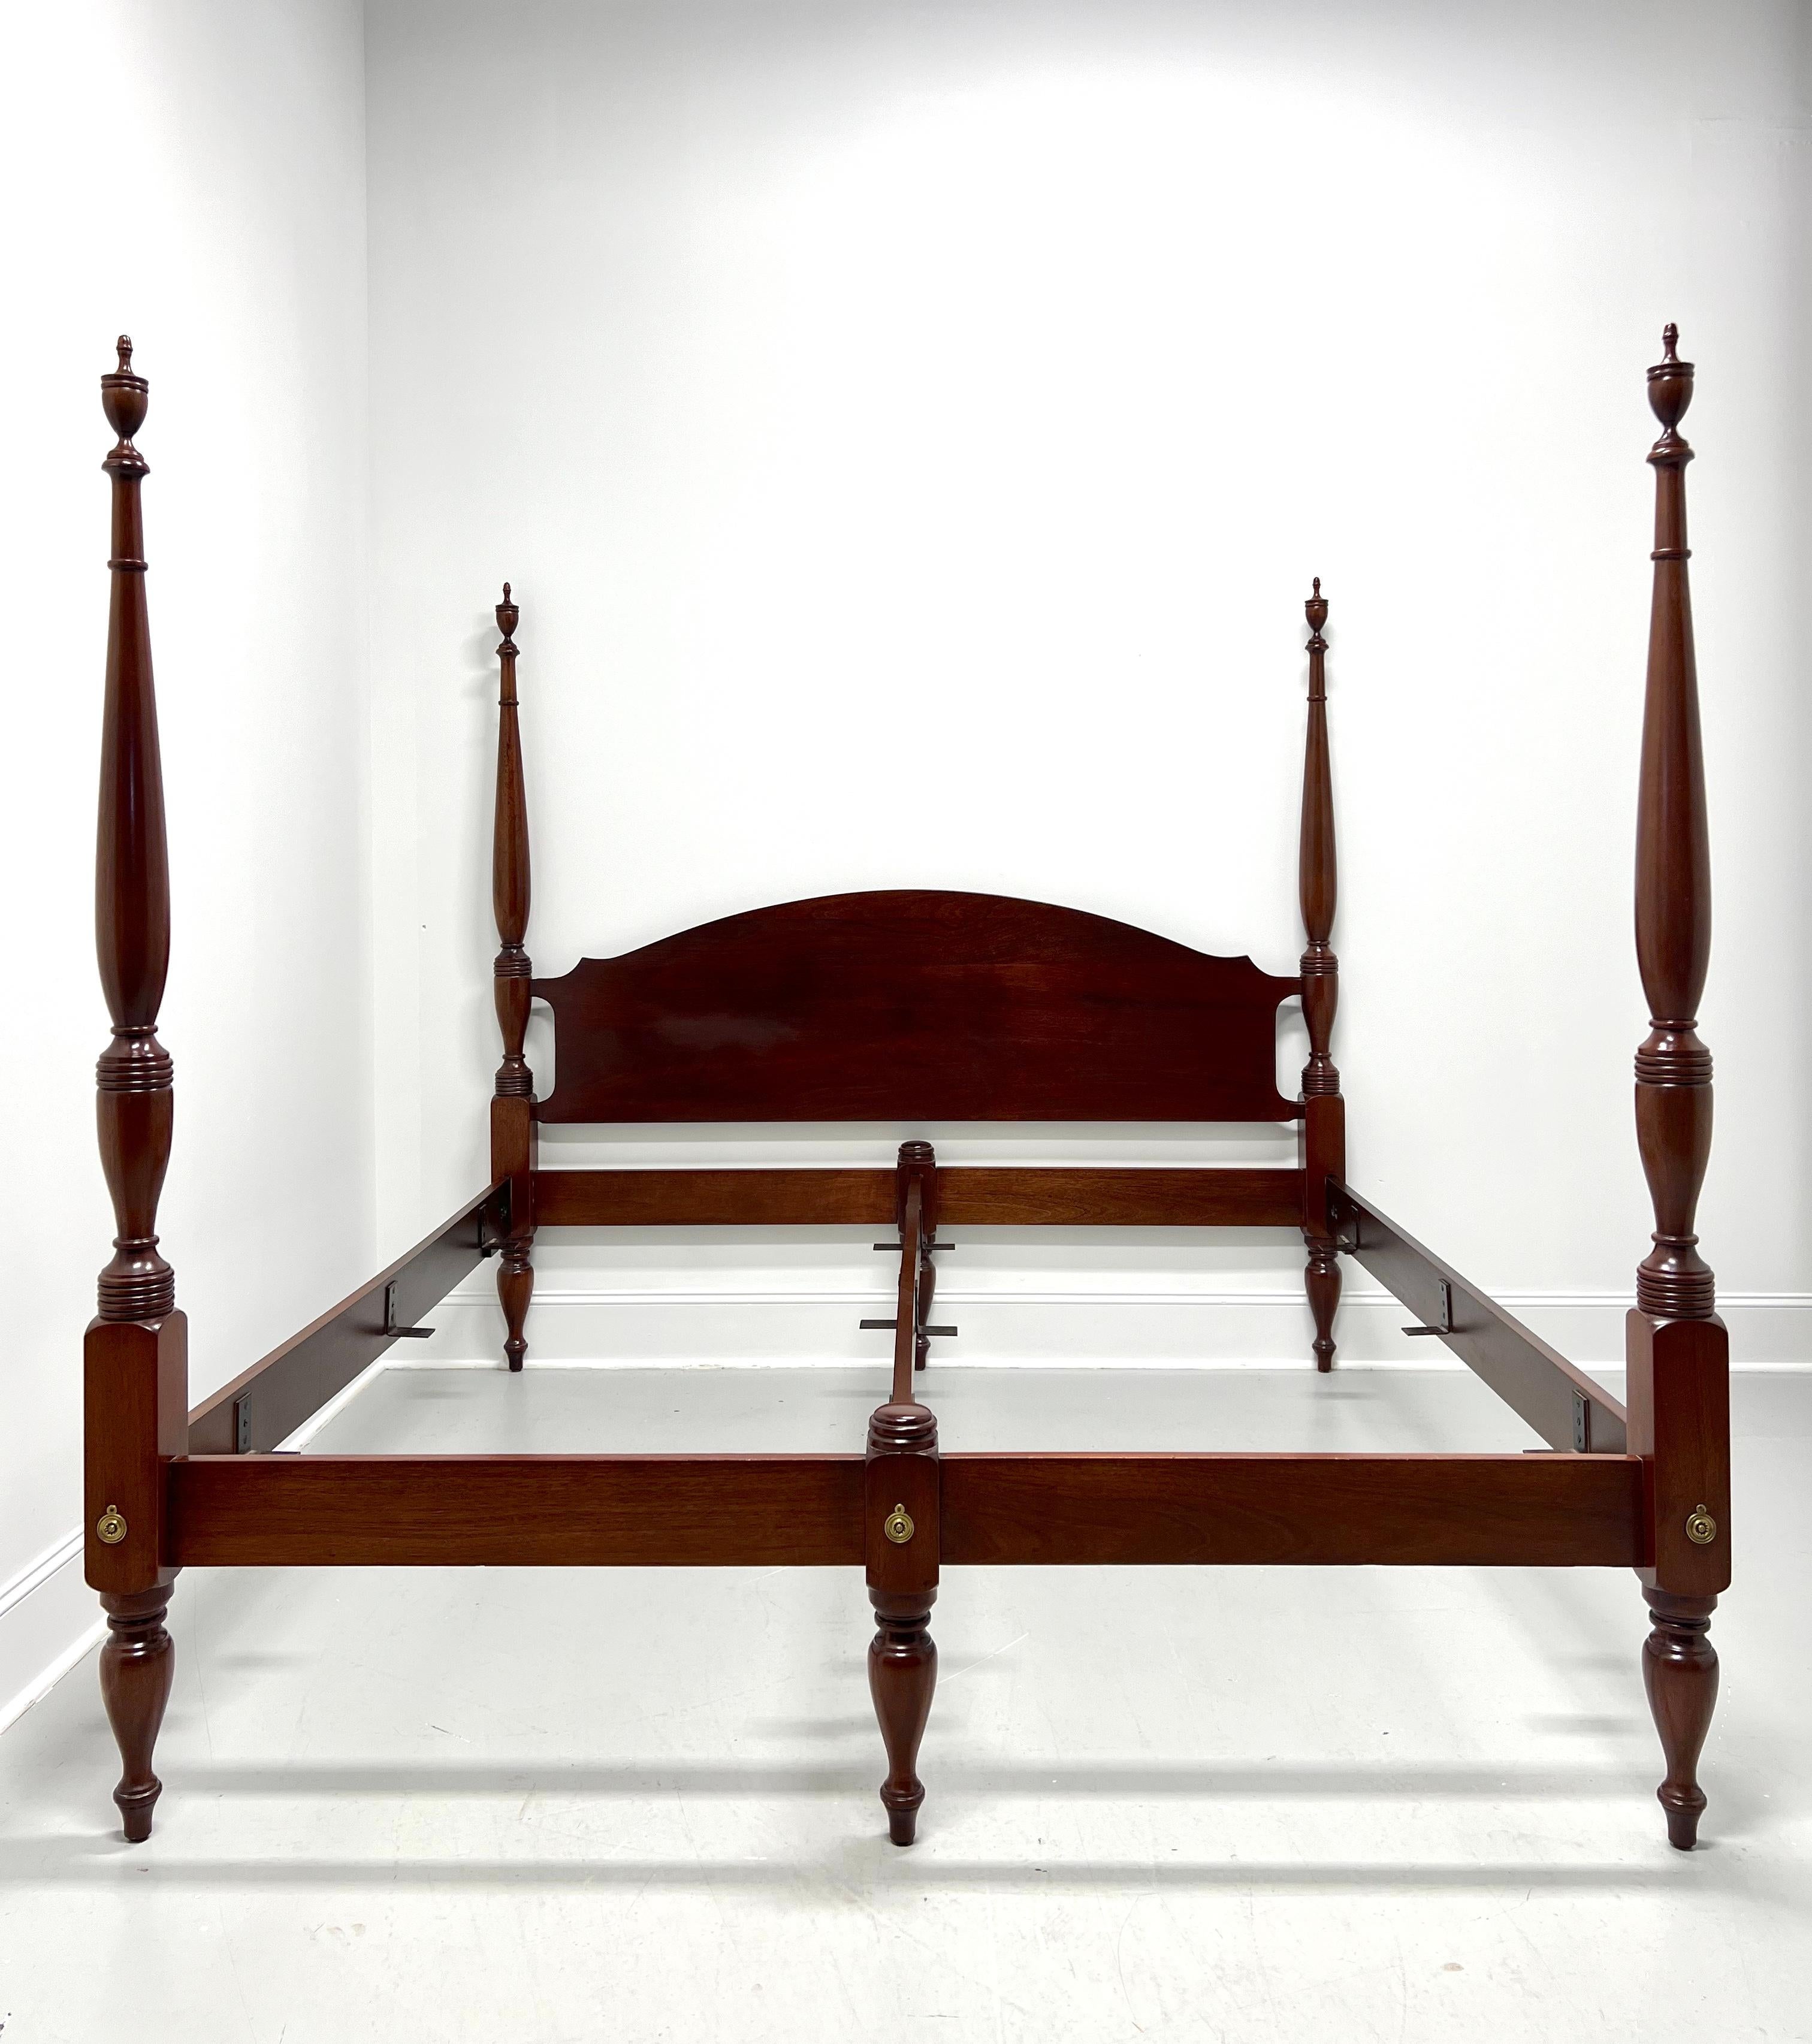 A Traditional style king size poster bed by high-quality furniture maker Craftique, their Ashlawn. Solid mahogany with an arched headboard, four decoratively turned plain posts with finials, two low decoratively capped posts at center, low rail